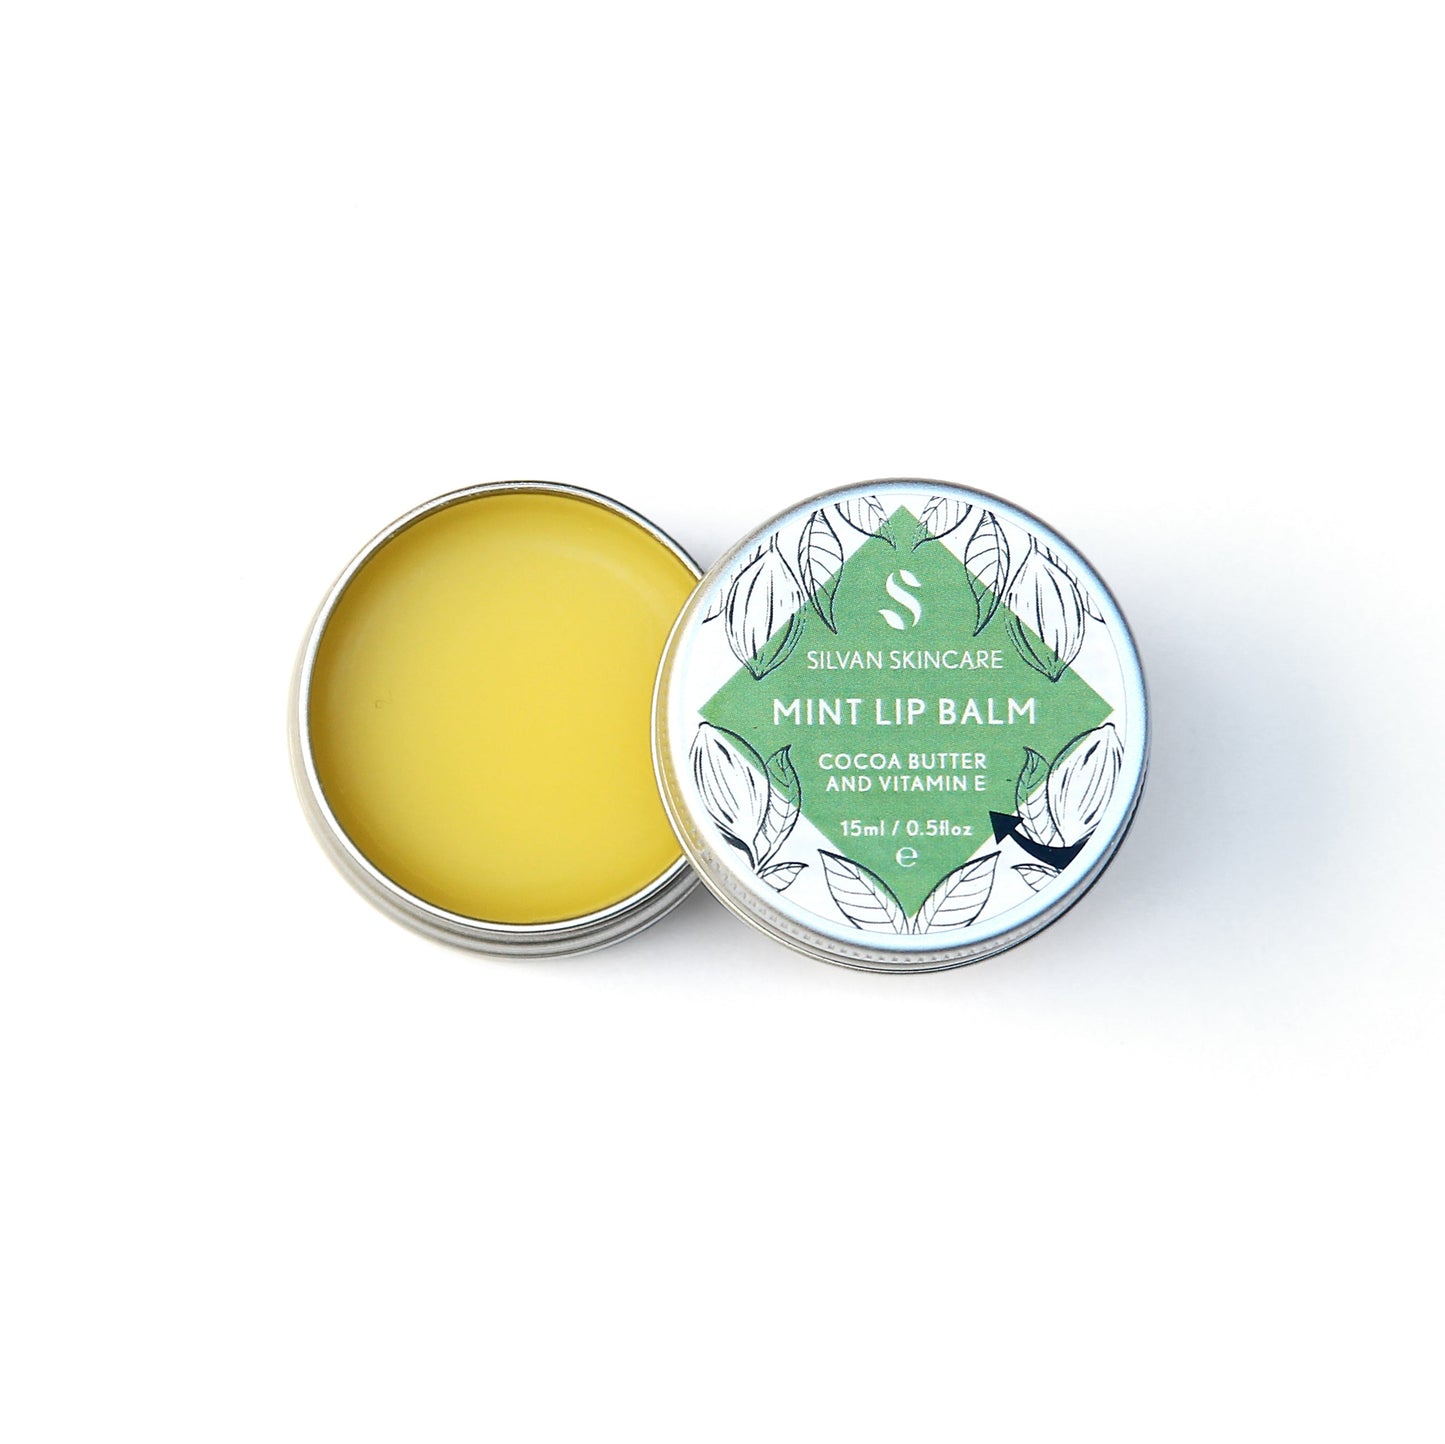 Single aluminium tin of the Silvan Skincare mint lip balm. The pot in open, showing the yellow balm inside and the lid is beside it showing the white and green label